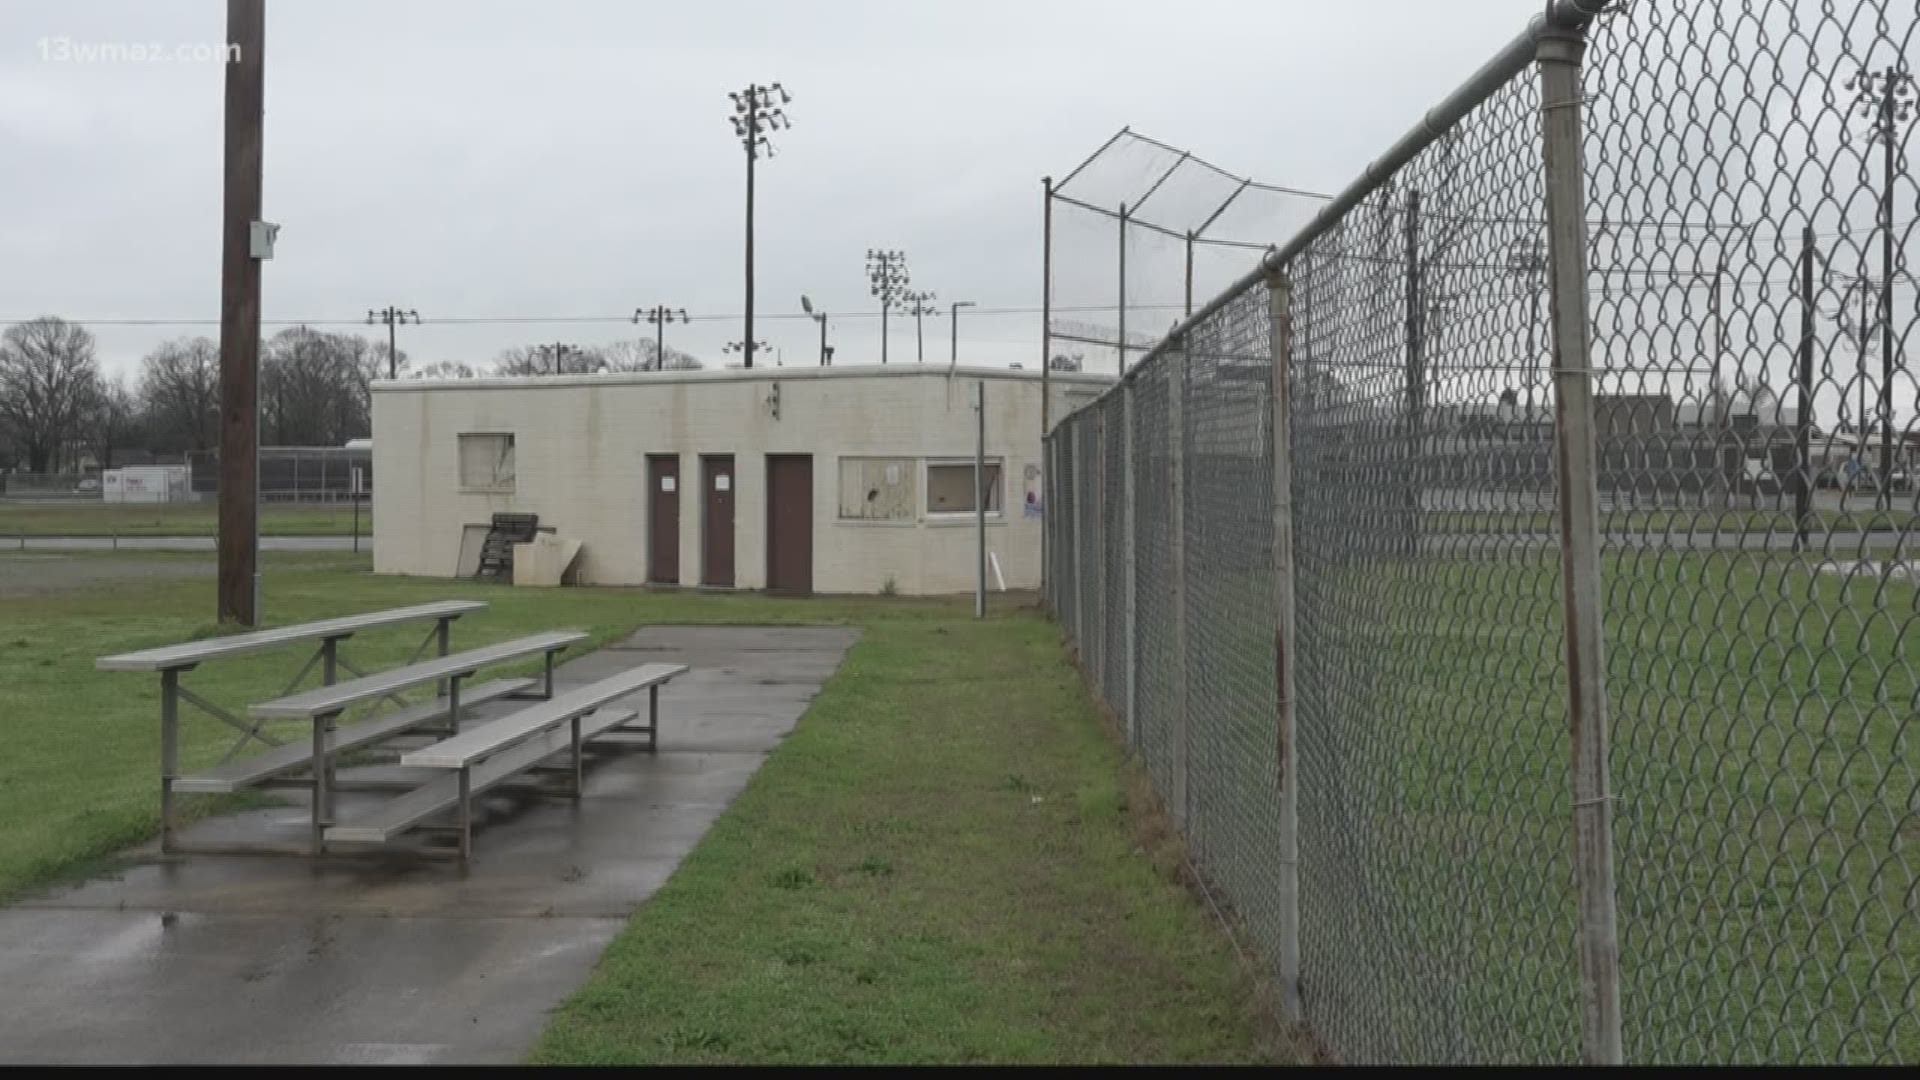 The company the City of Warner Robins brought  in to handle the Perkins Field development project says the city isn't living up to its end of the bargain.